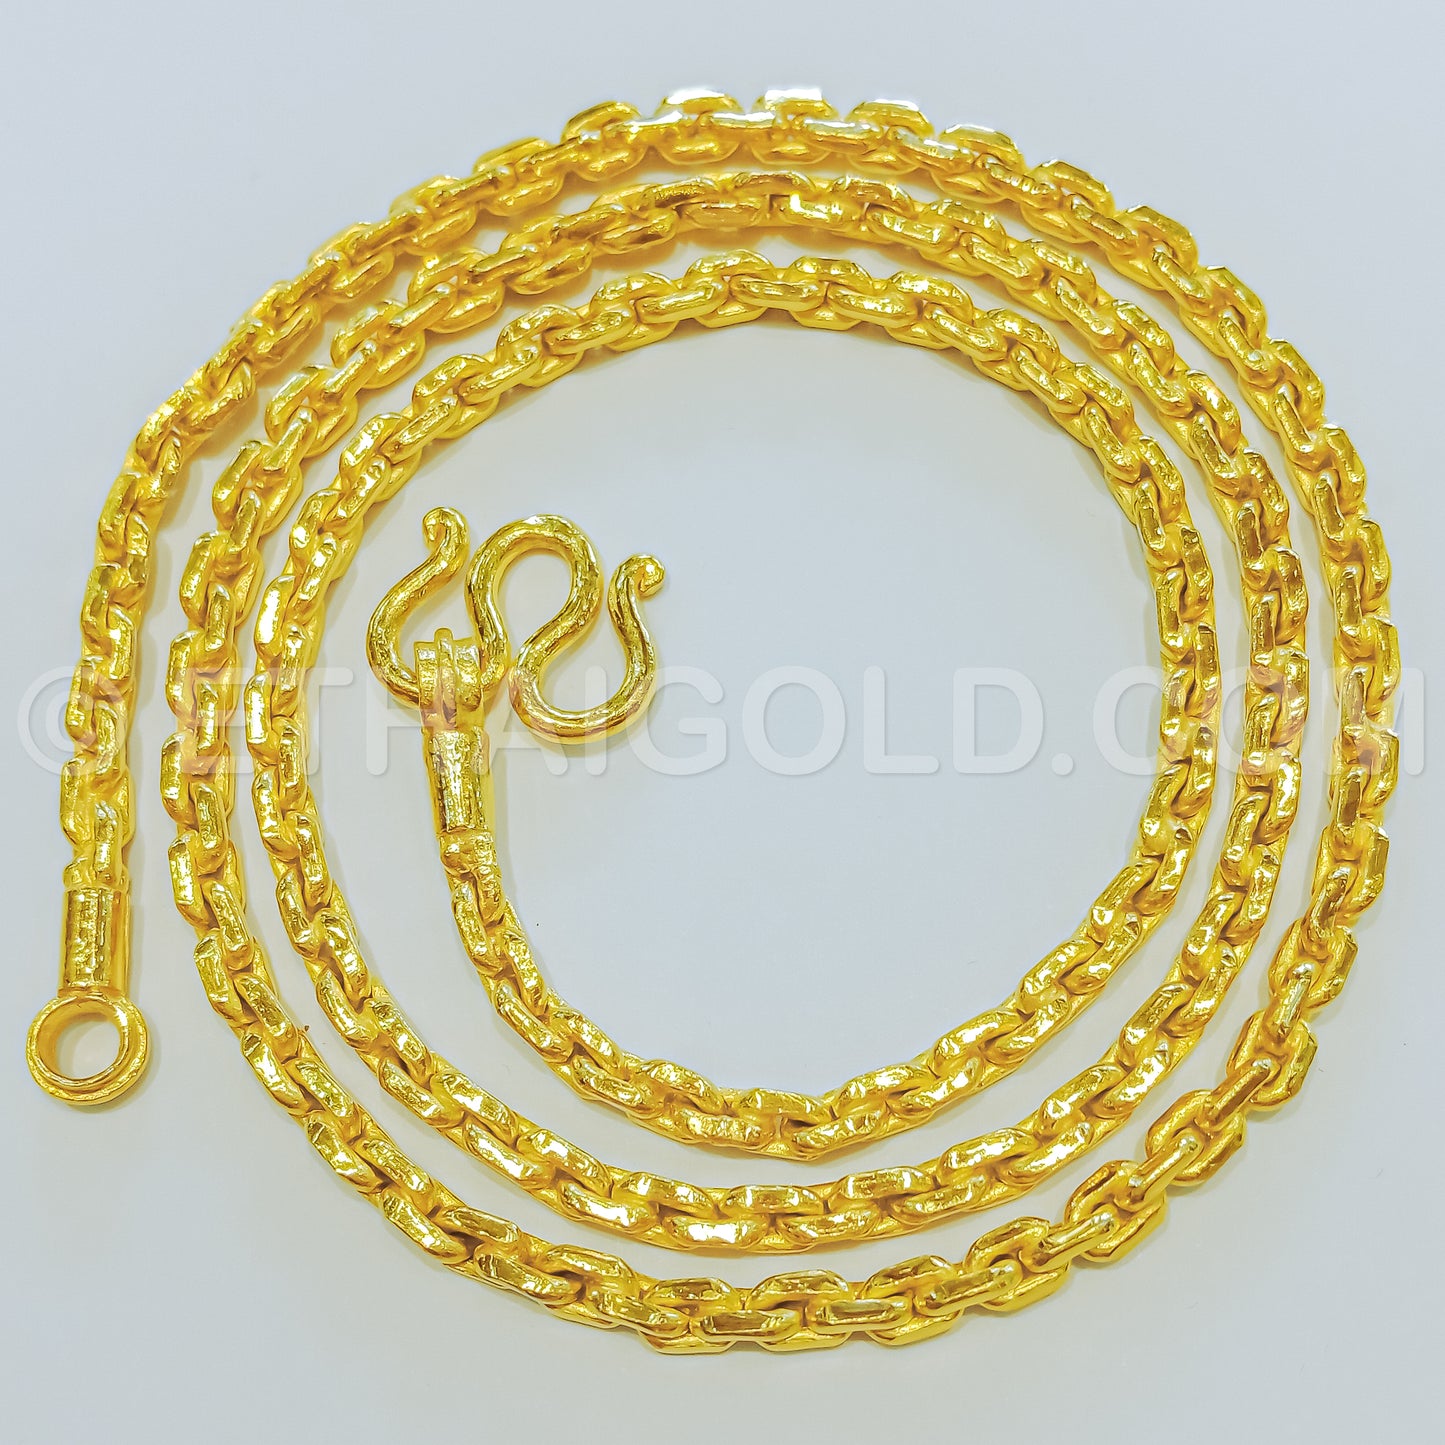 5 BAHT POLISHED SOLID ANCHOR CHAIN NECKLACE IN 23K GOLD (ID: N0305B)